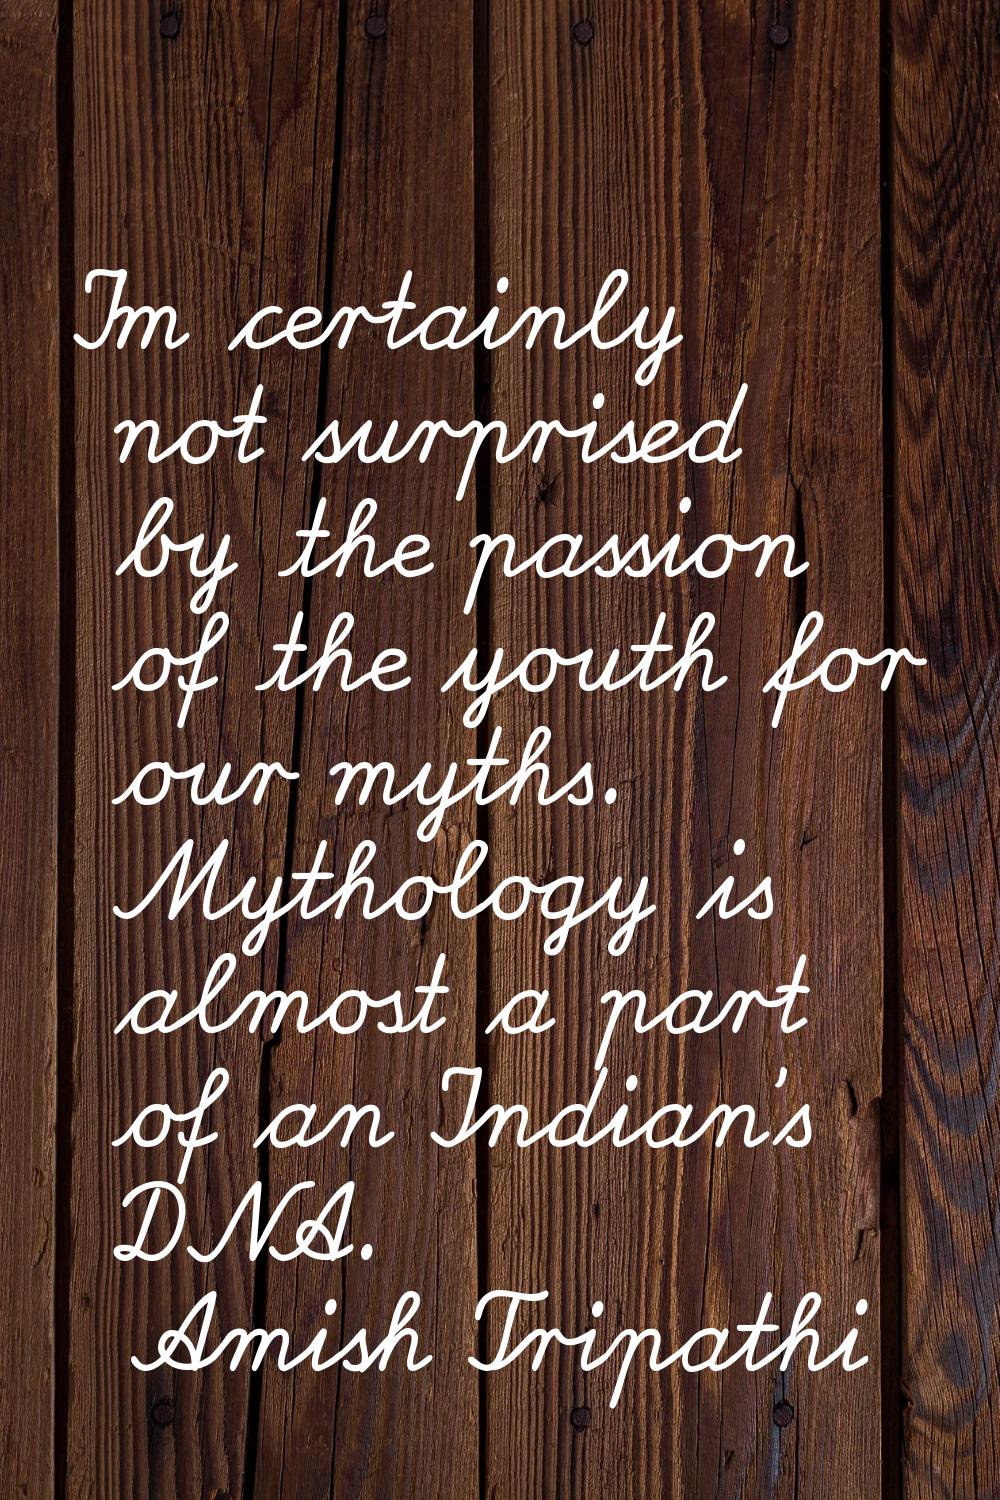 I'm certainly not surprised by the passion of the youth for our myths. Mythology is almost a part o